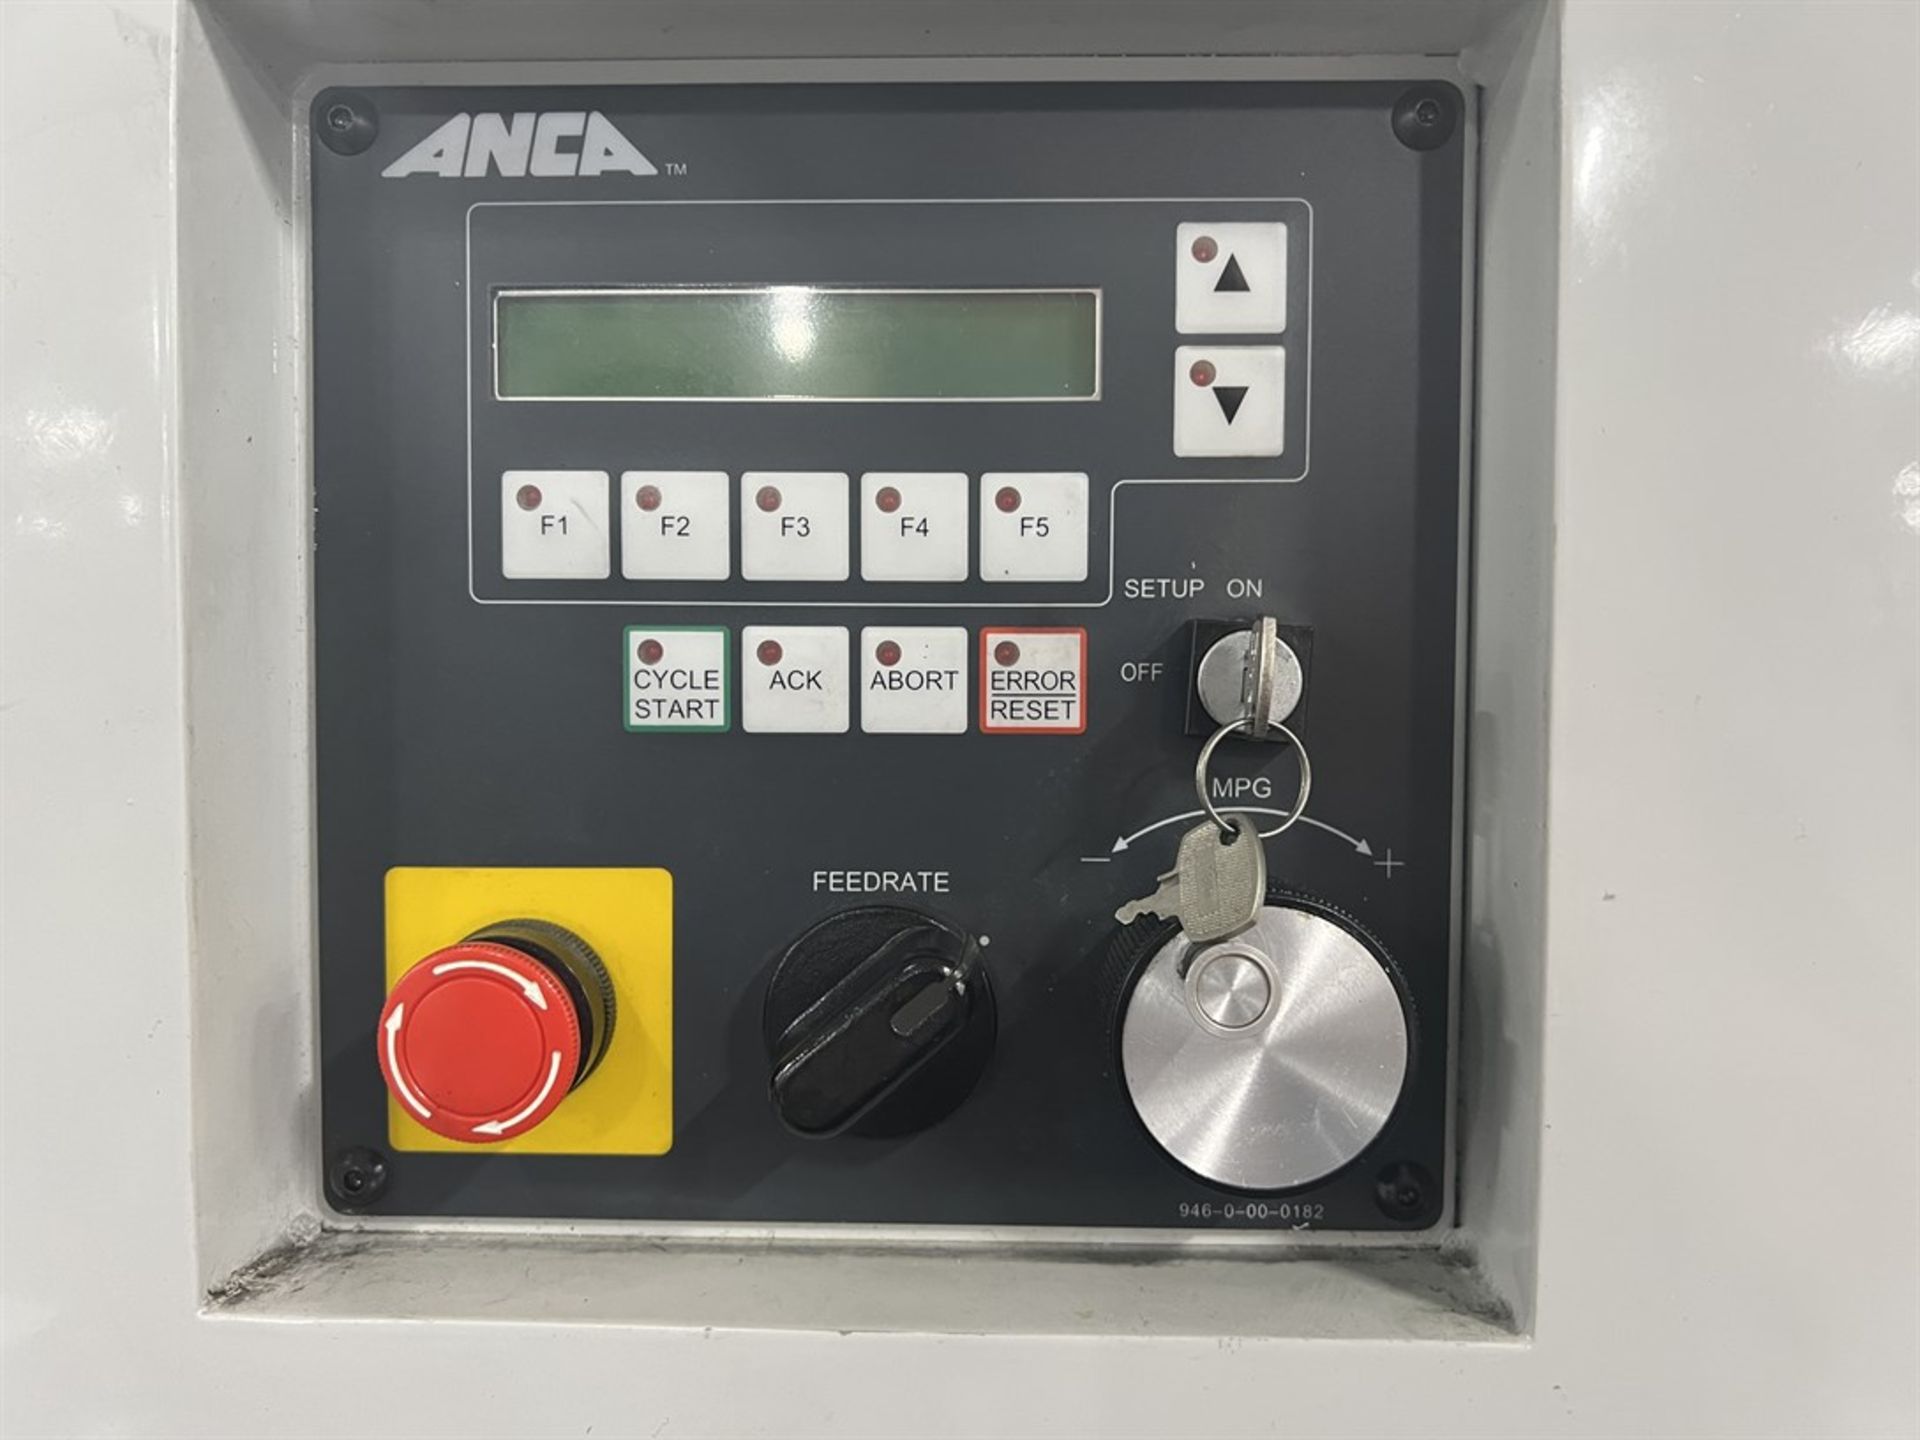 2010 ANCA RX7 CNC Tool & Cutter Grinder, s/n 800788, Anca 5DX Control, 8" Grinding Wheel, 9.4" - Image 14 of 14